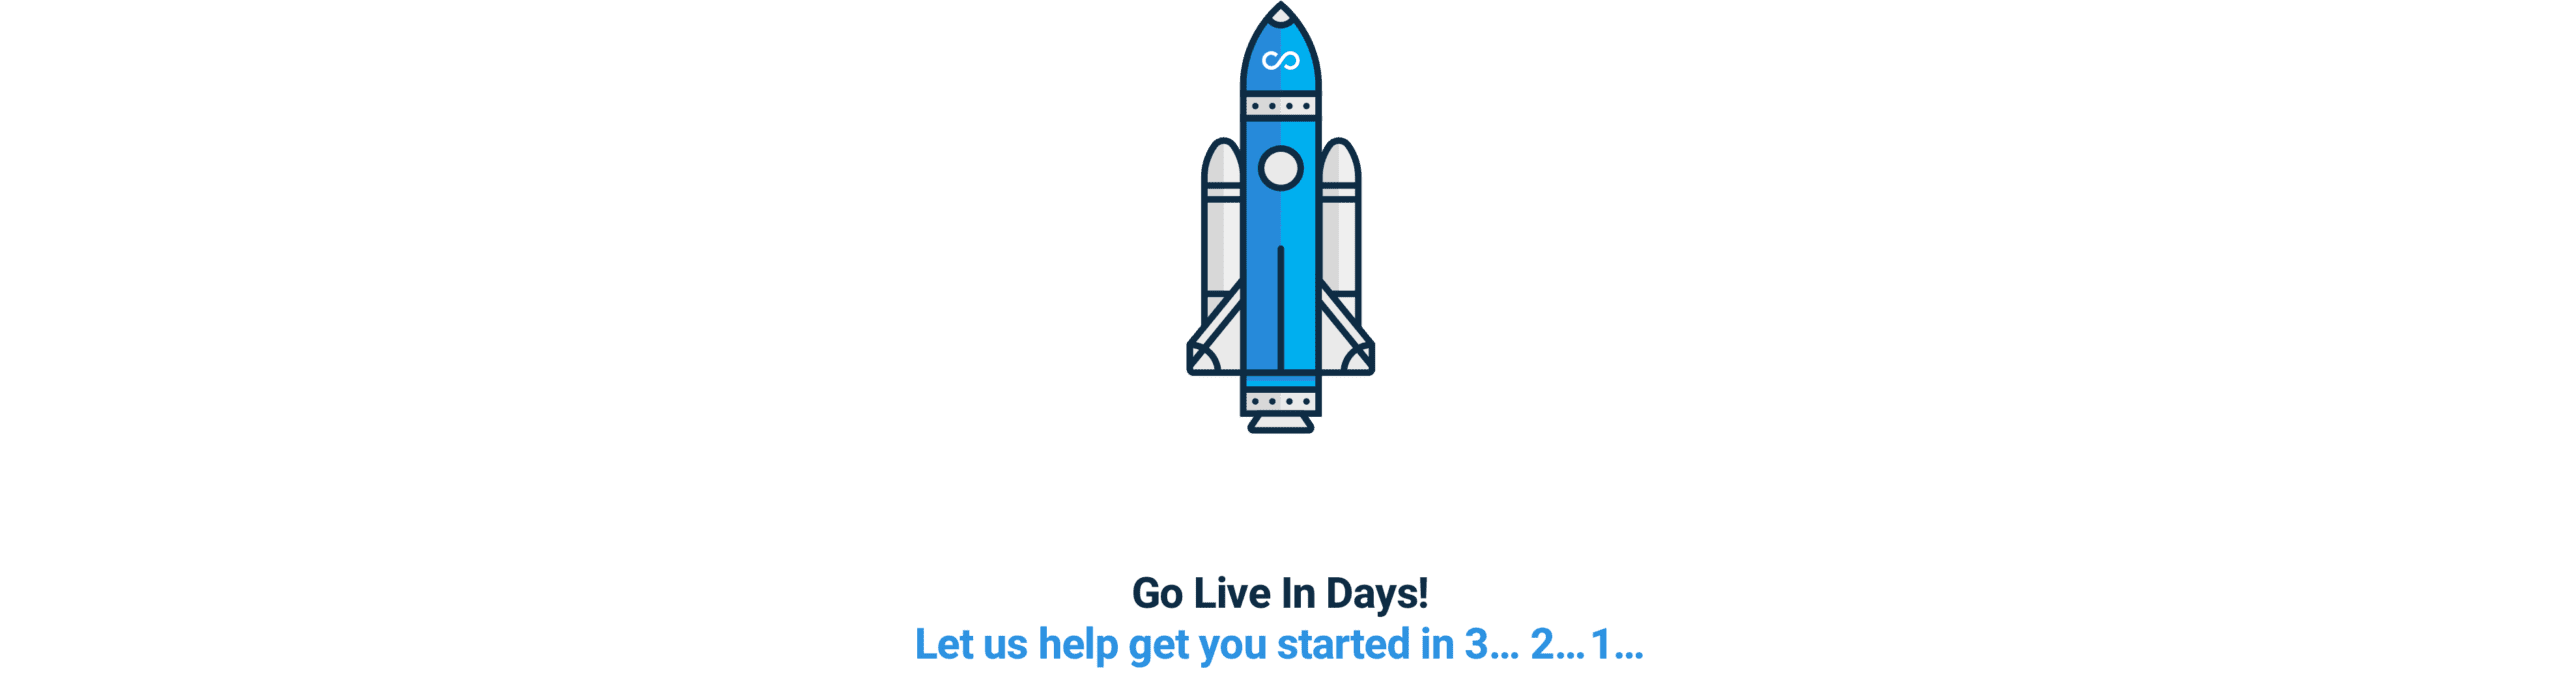 Add Rocket Fuel to Your Business